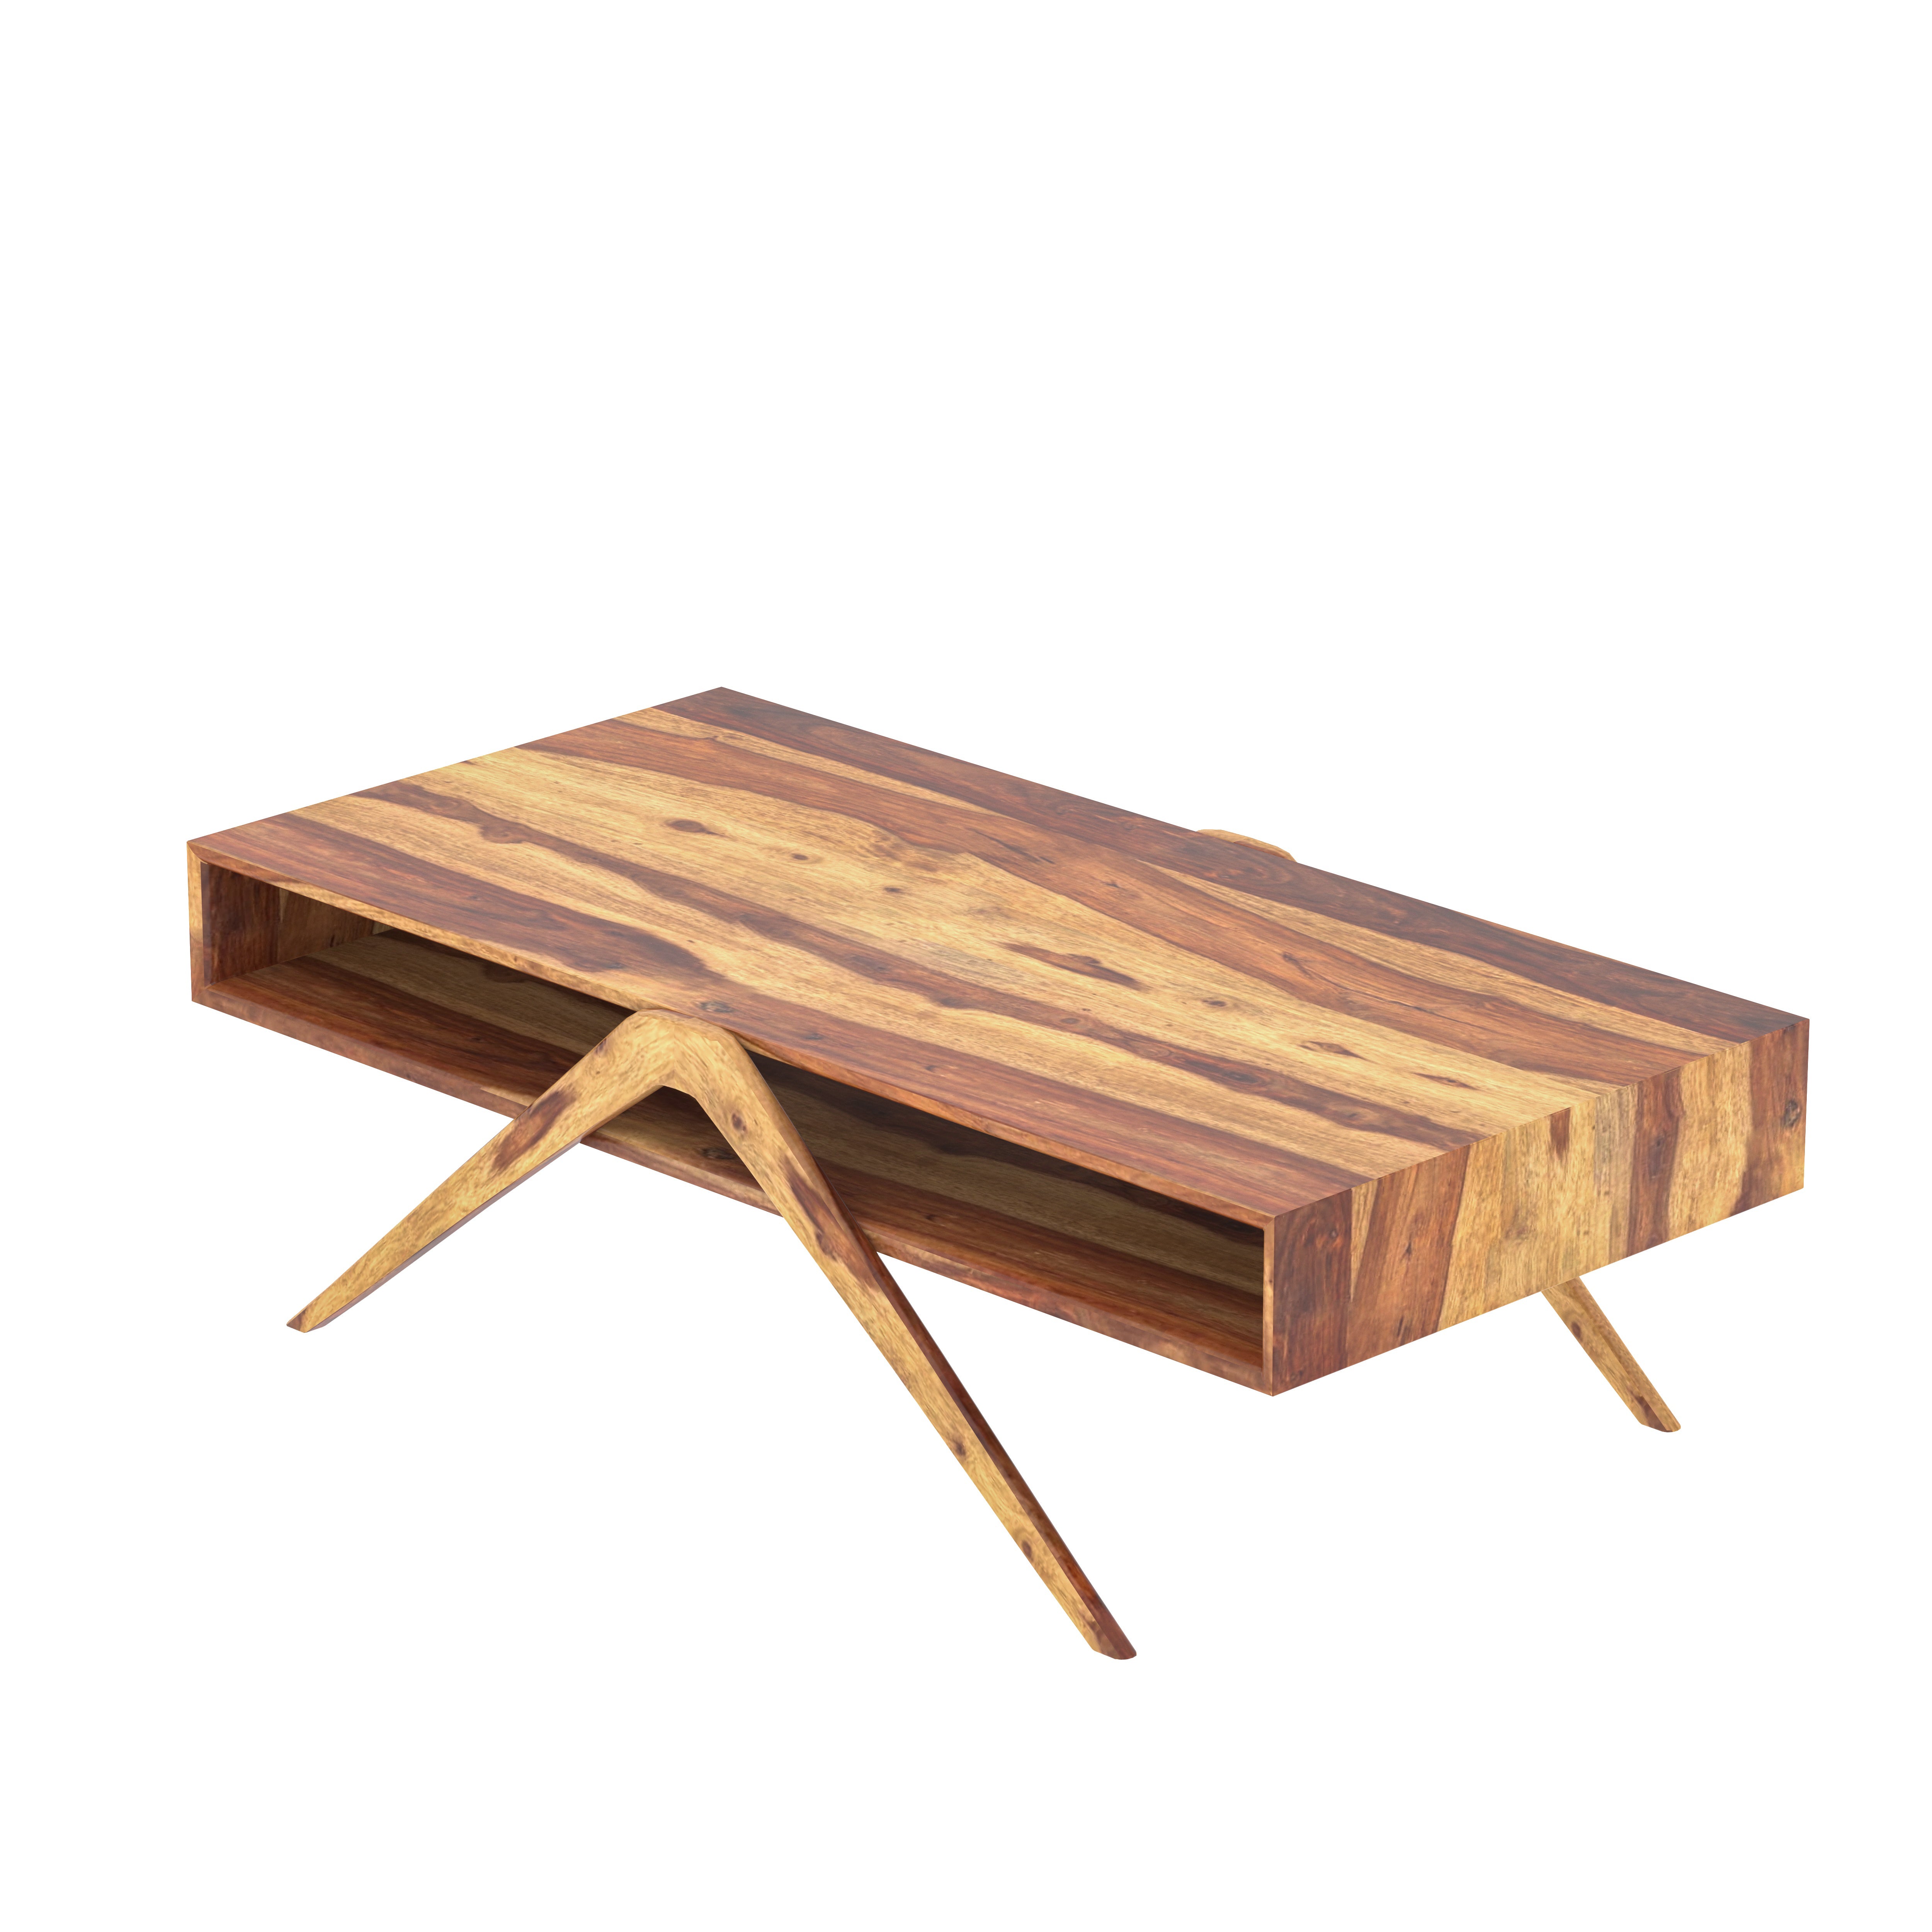 Denver Flora Finished Cross Legs Wooden Handmade Coffee Table Coffee Table